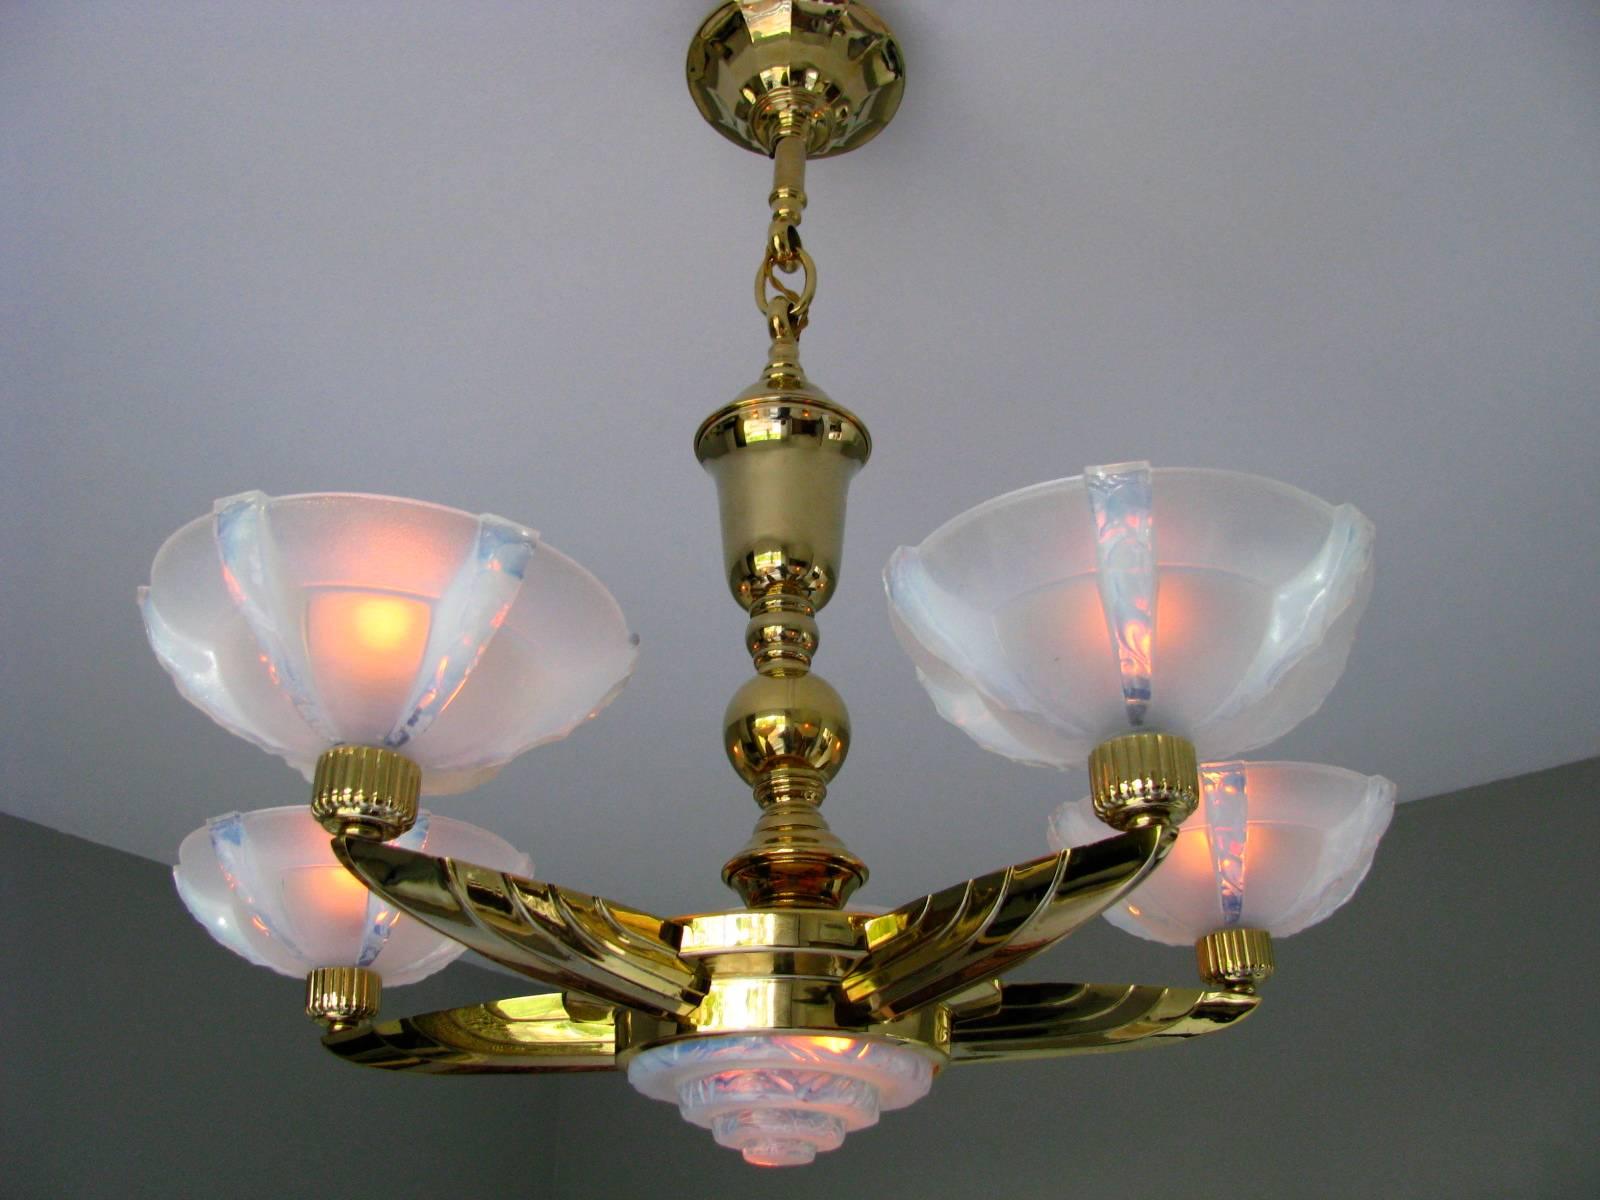 French Art Deco Signed Petitot Chandelier 24-karat Gold Plated Opalescent